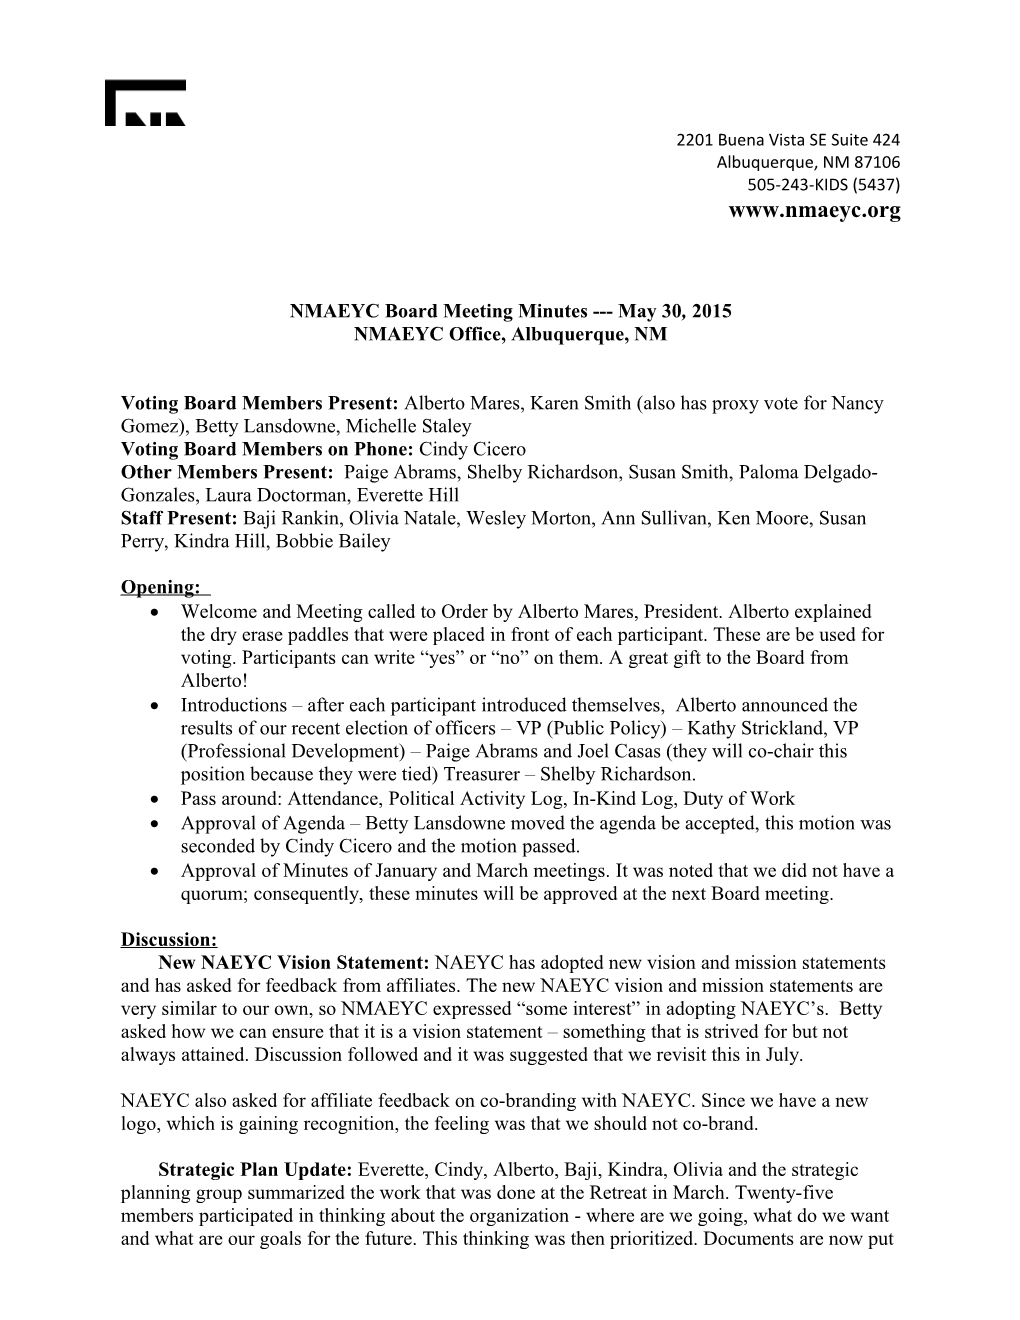 NMAEYC Board Meeting Minutes May30, 2015